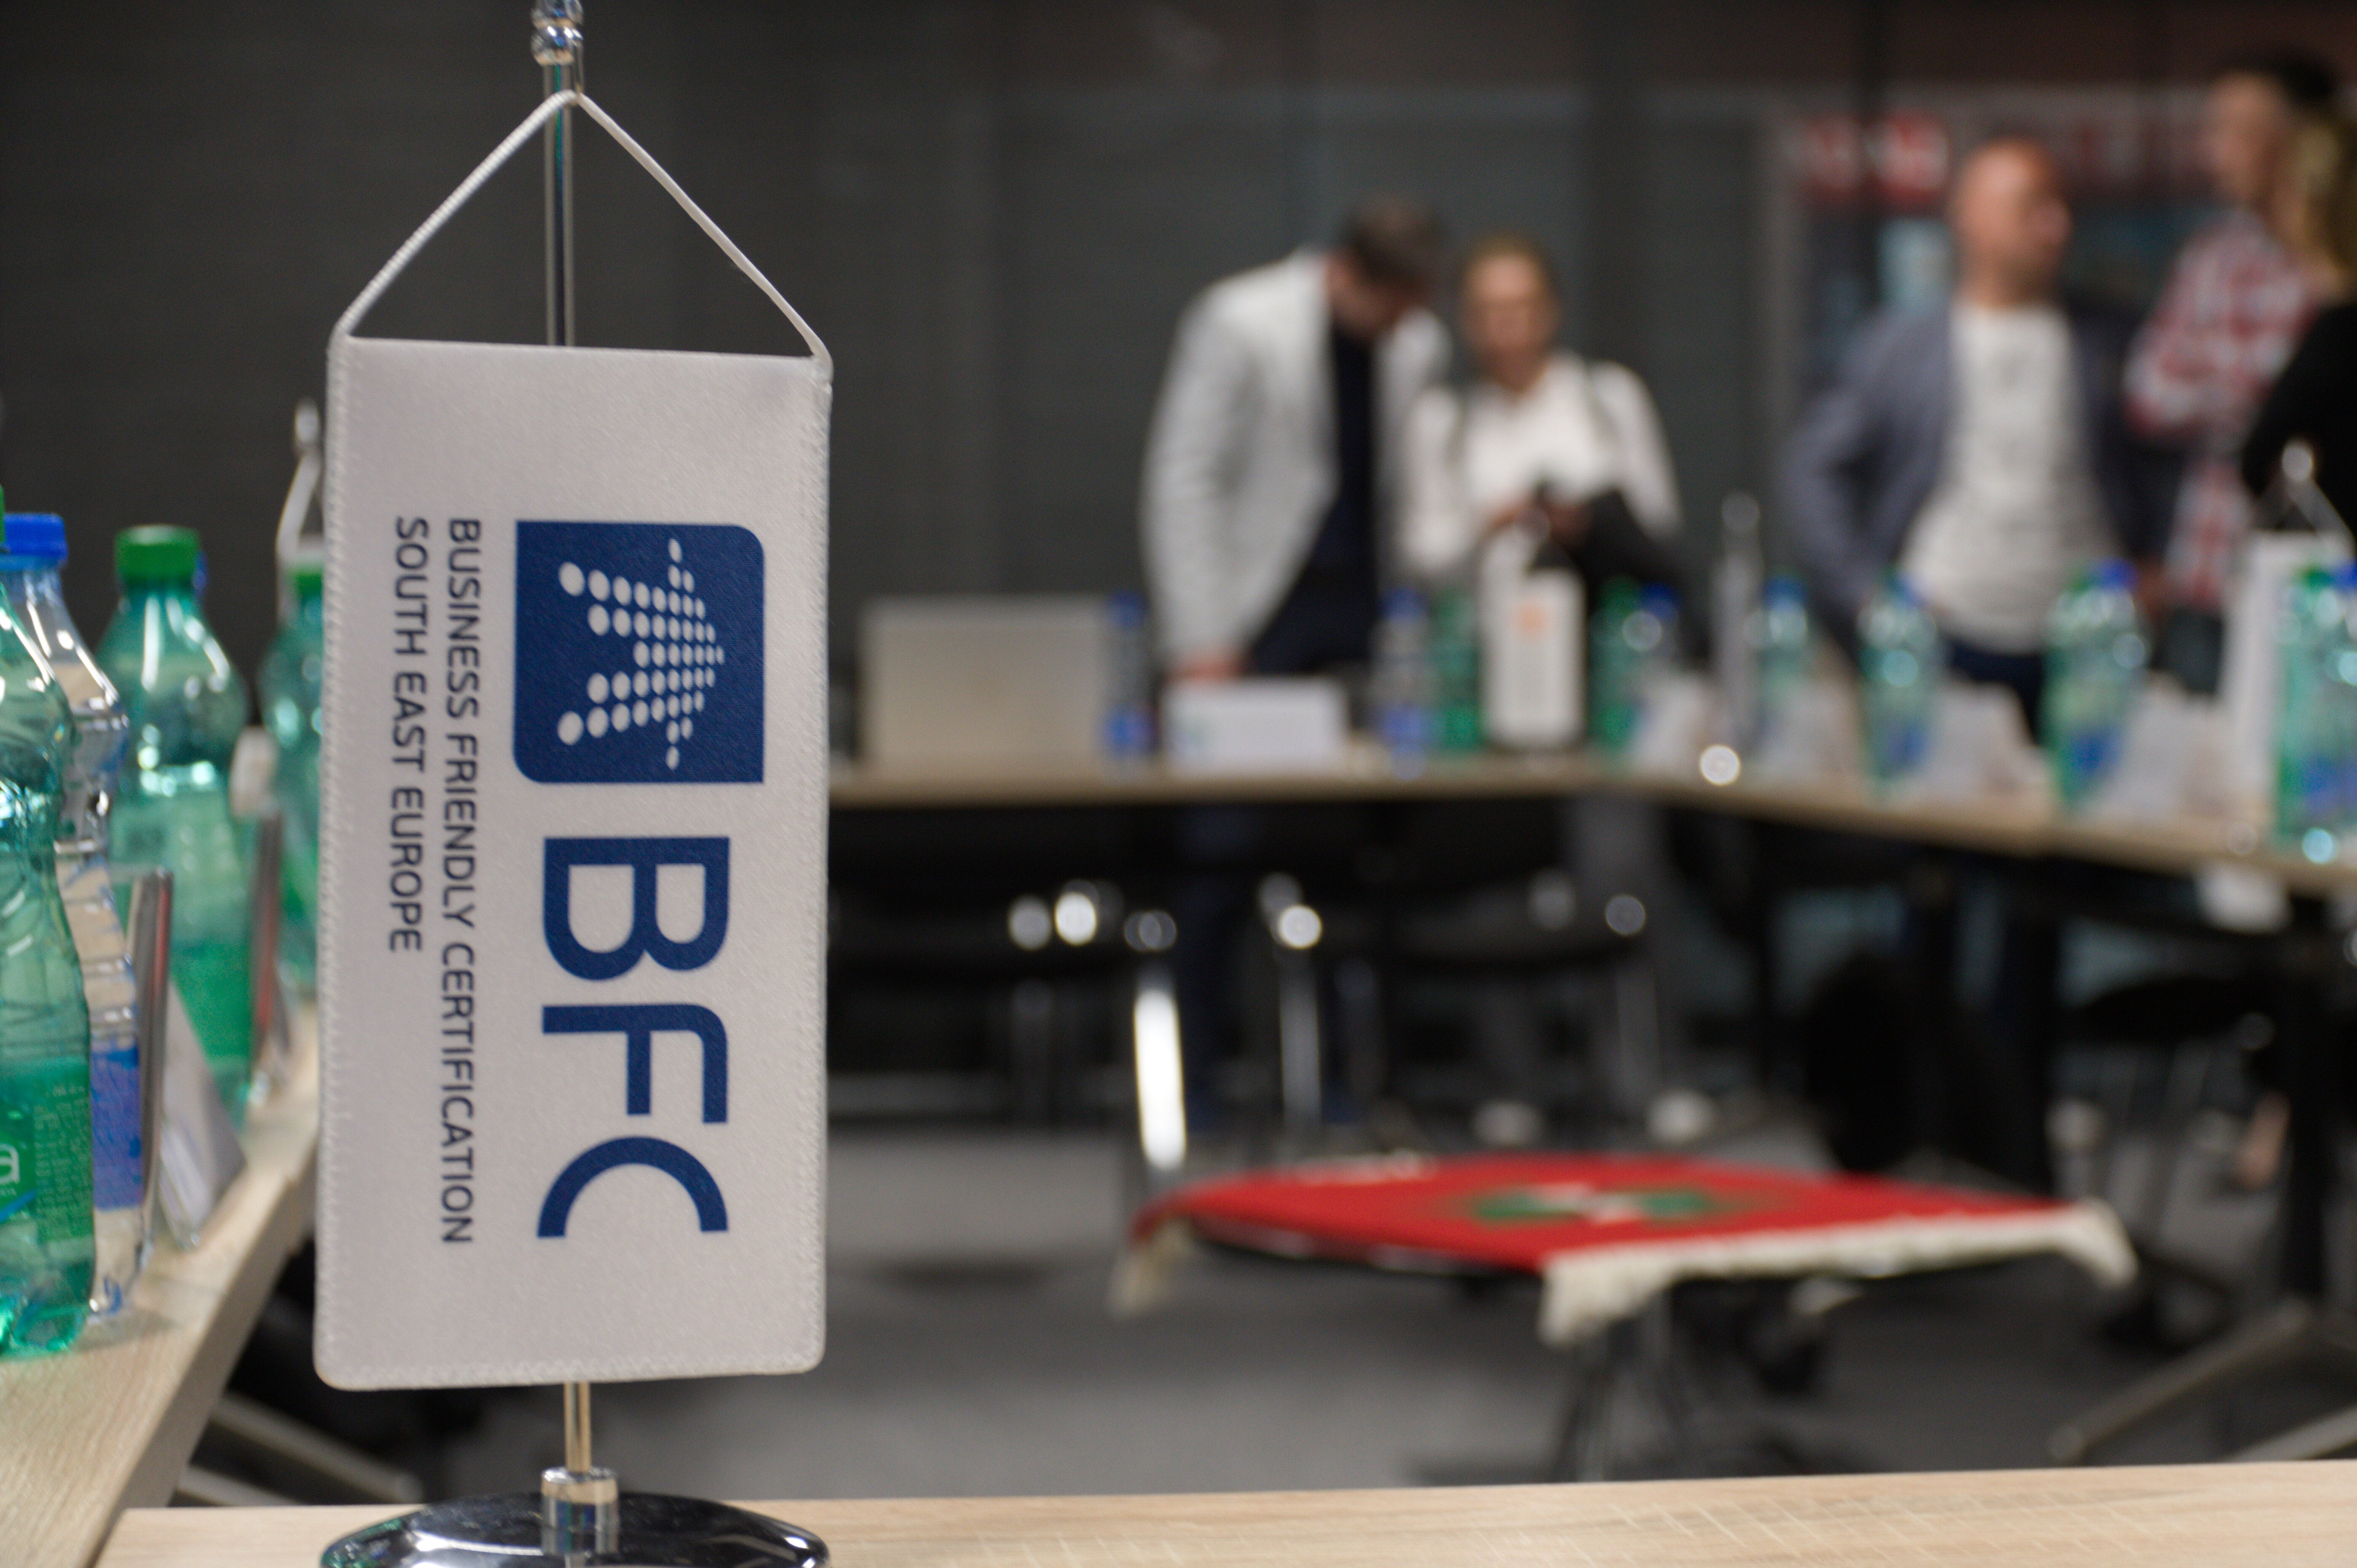 Trainings for new BFC SEE evaluators organized throughout the region